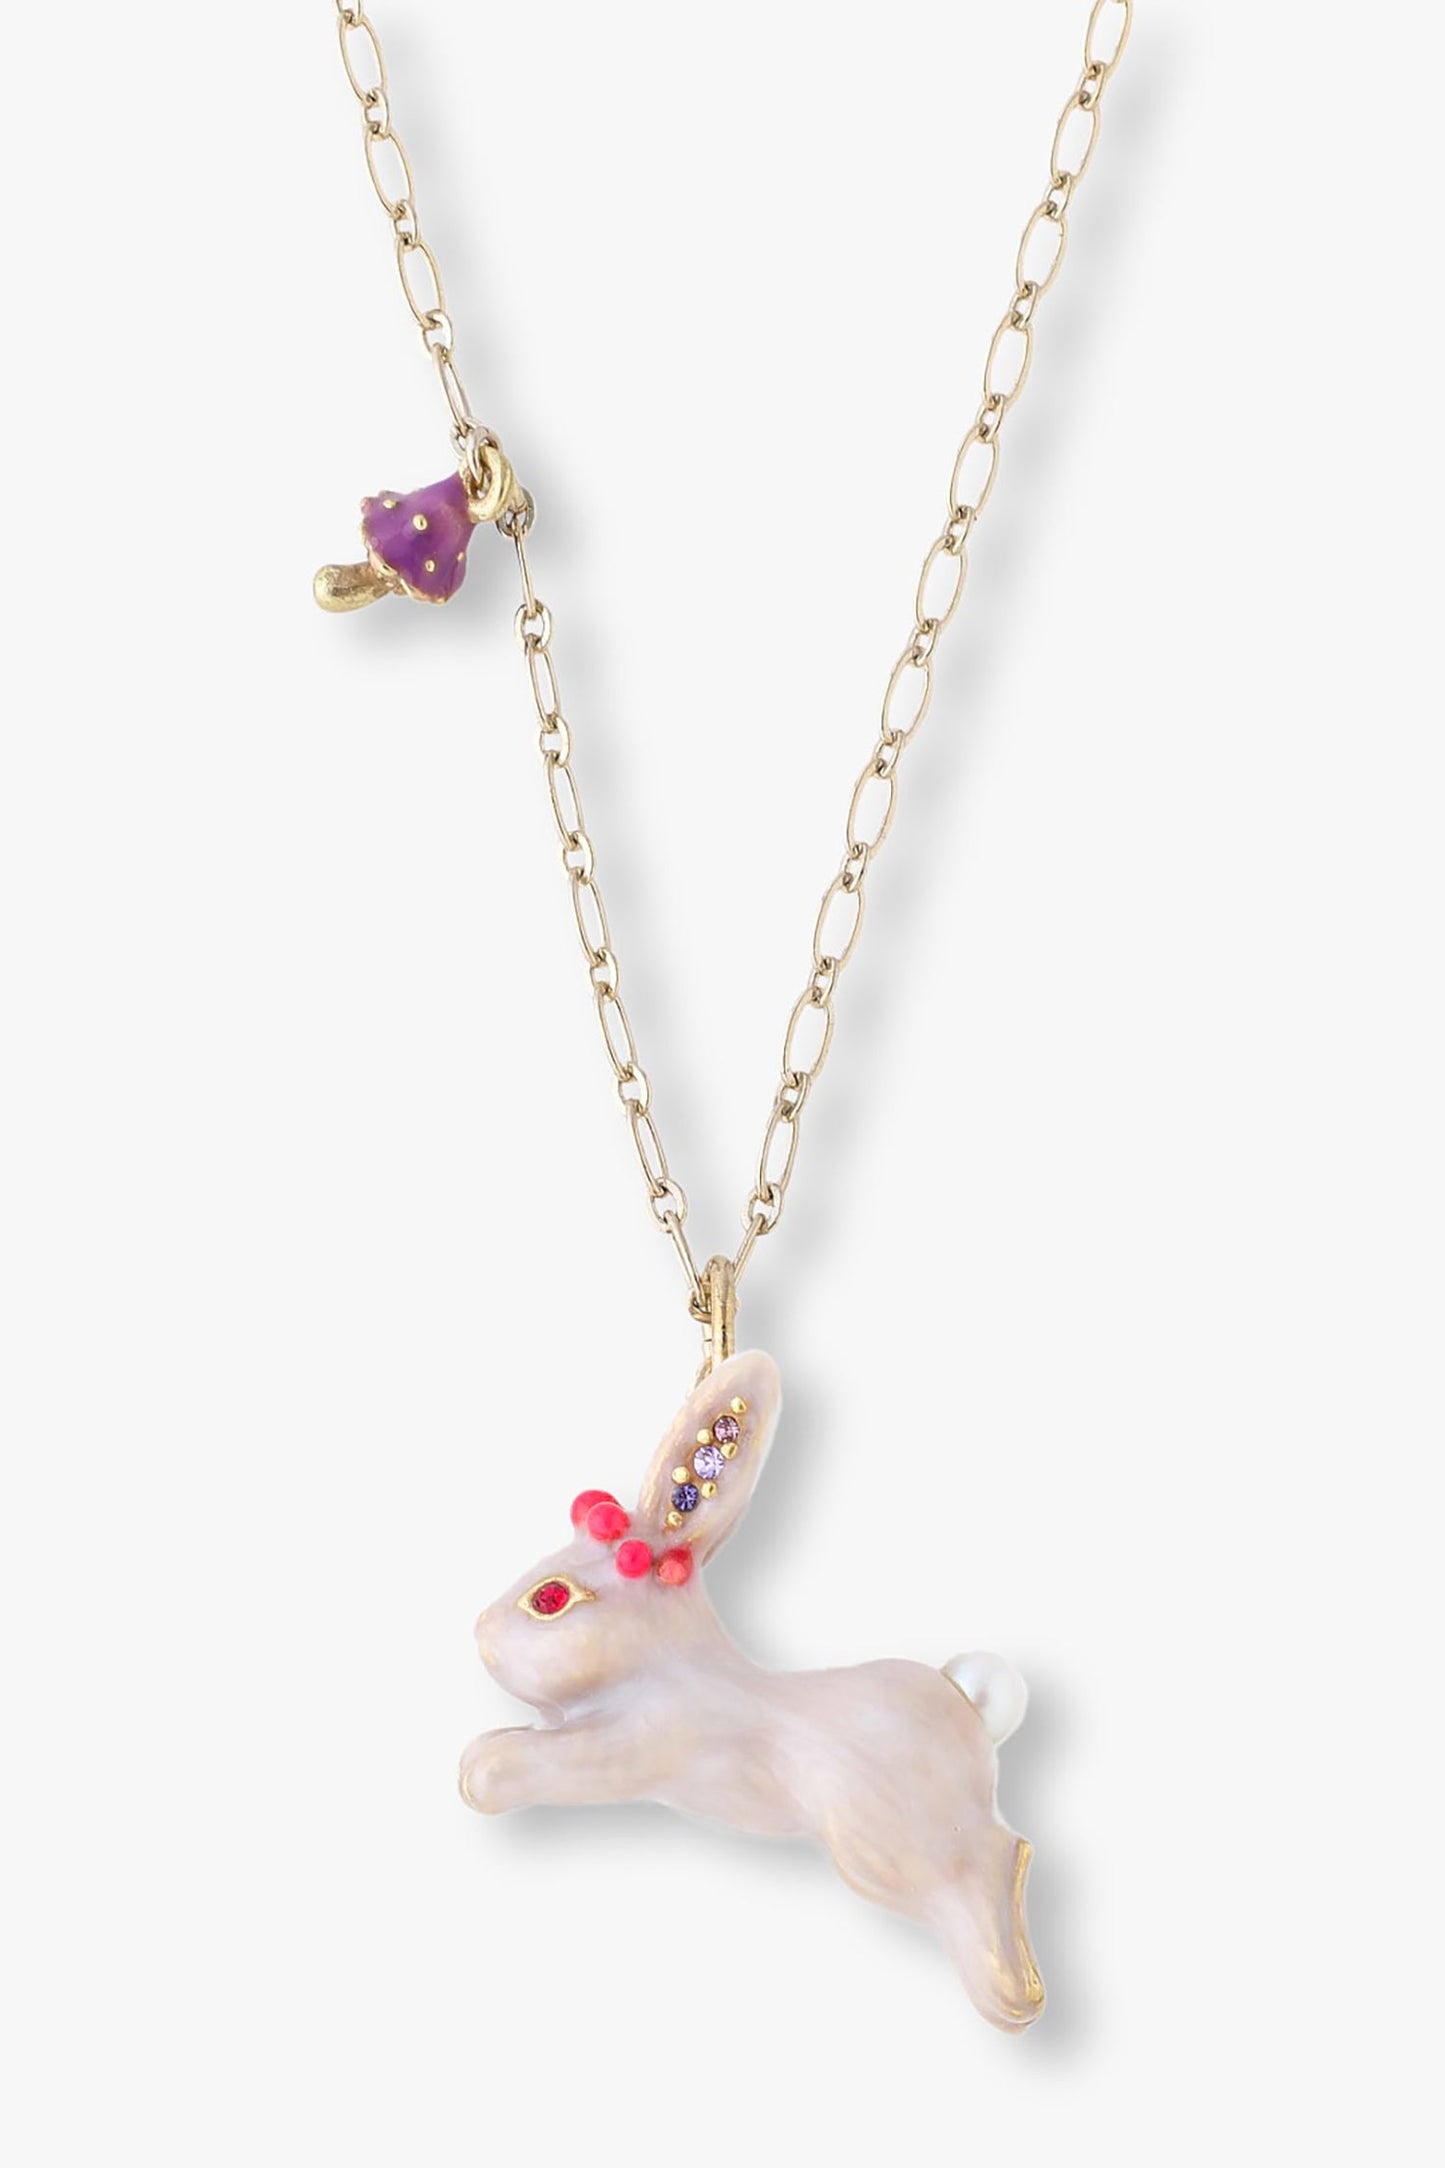 Necklace, Golden chain, small gold/purple mushroom, white rabbit, red eye and crown, purple ear